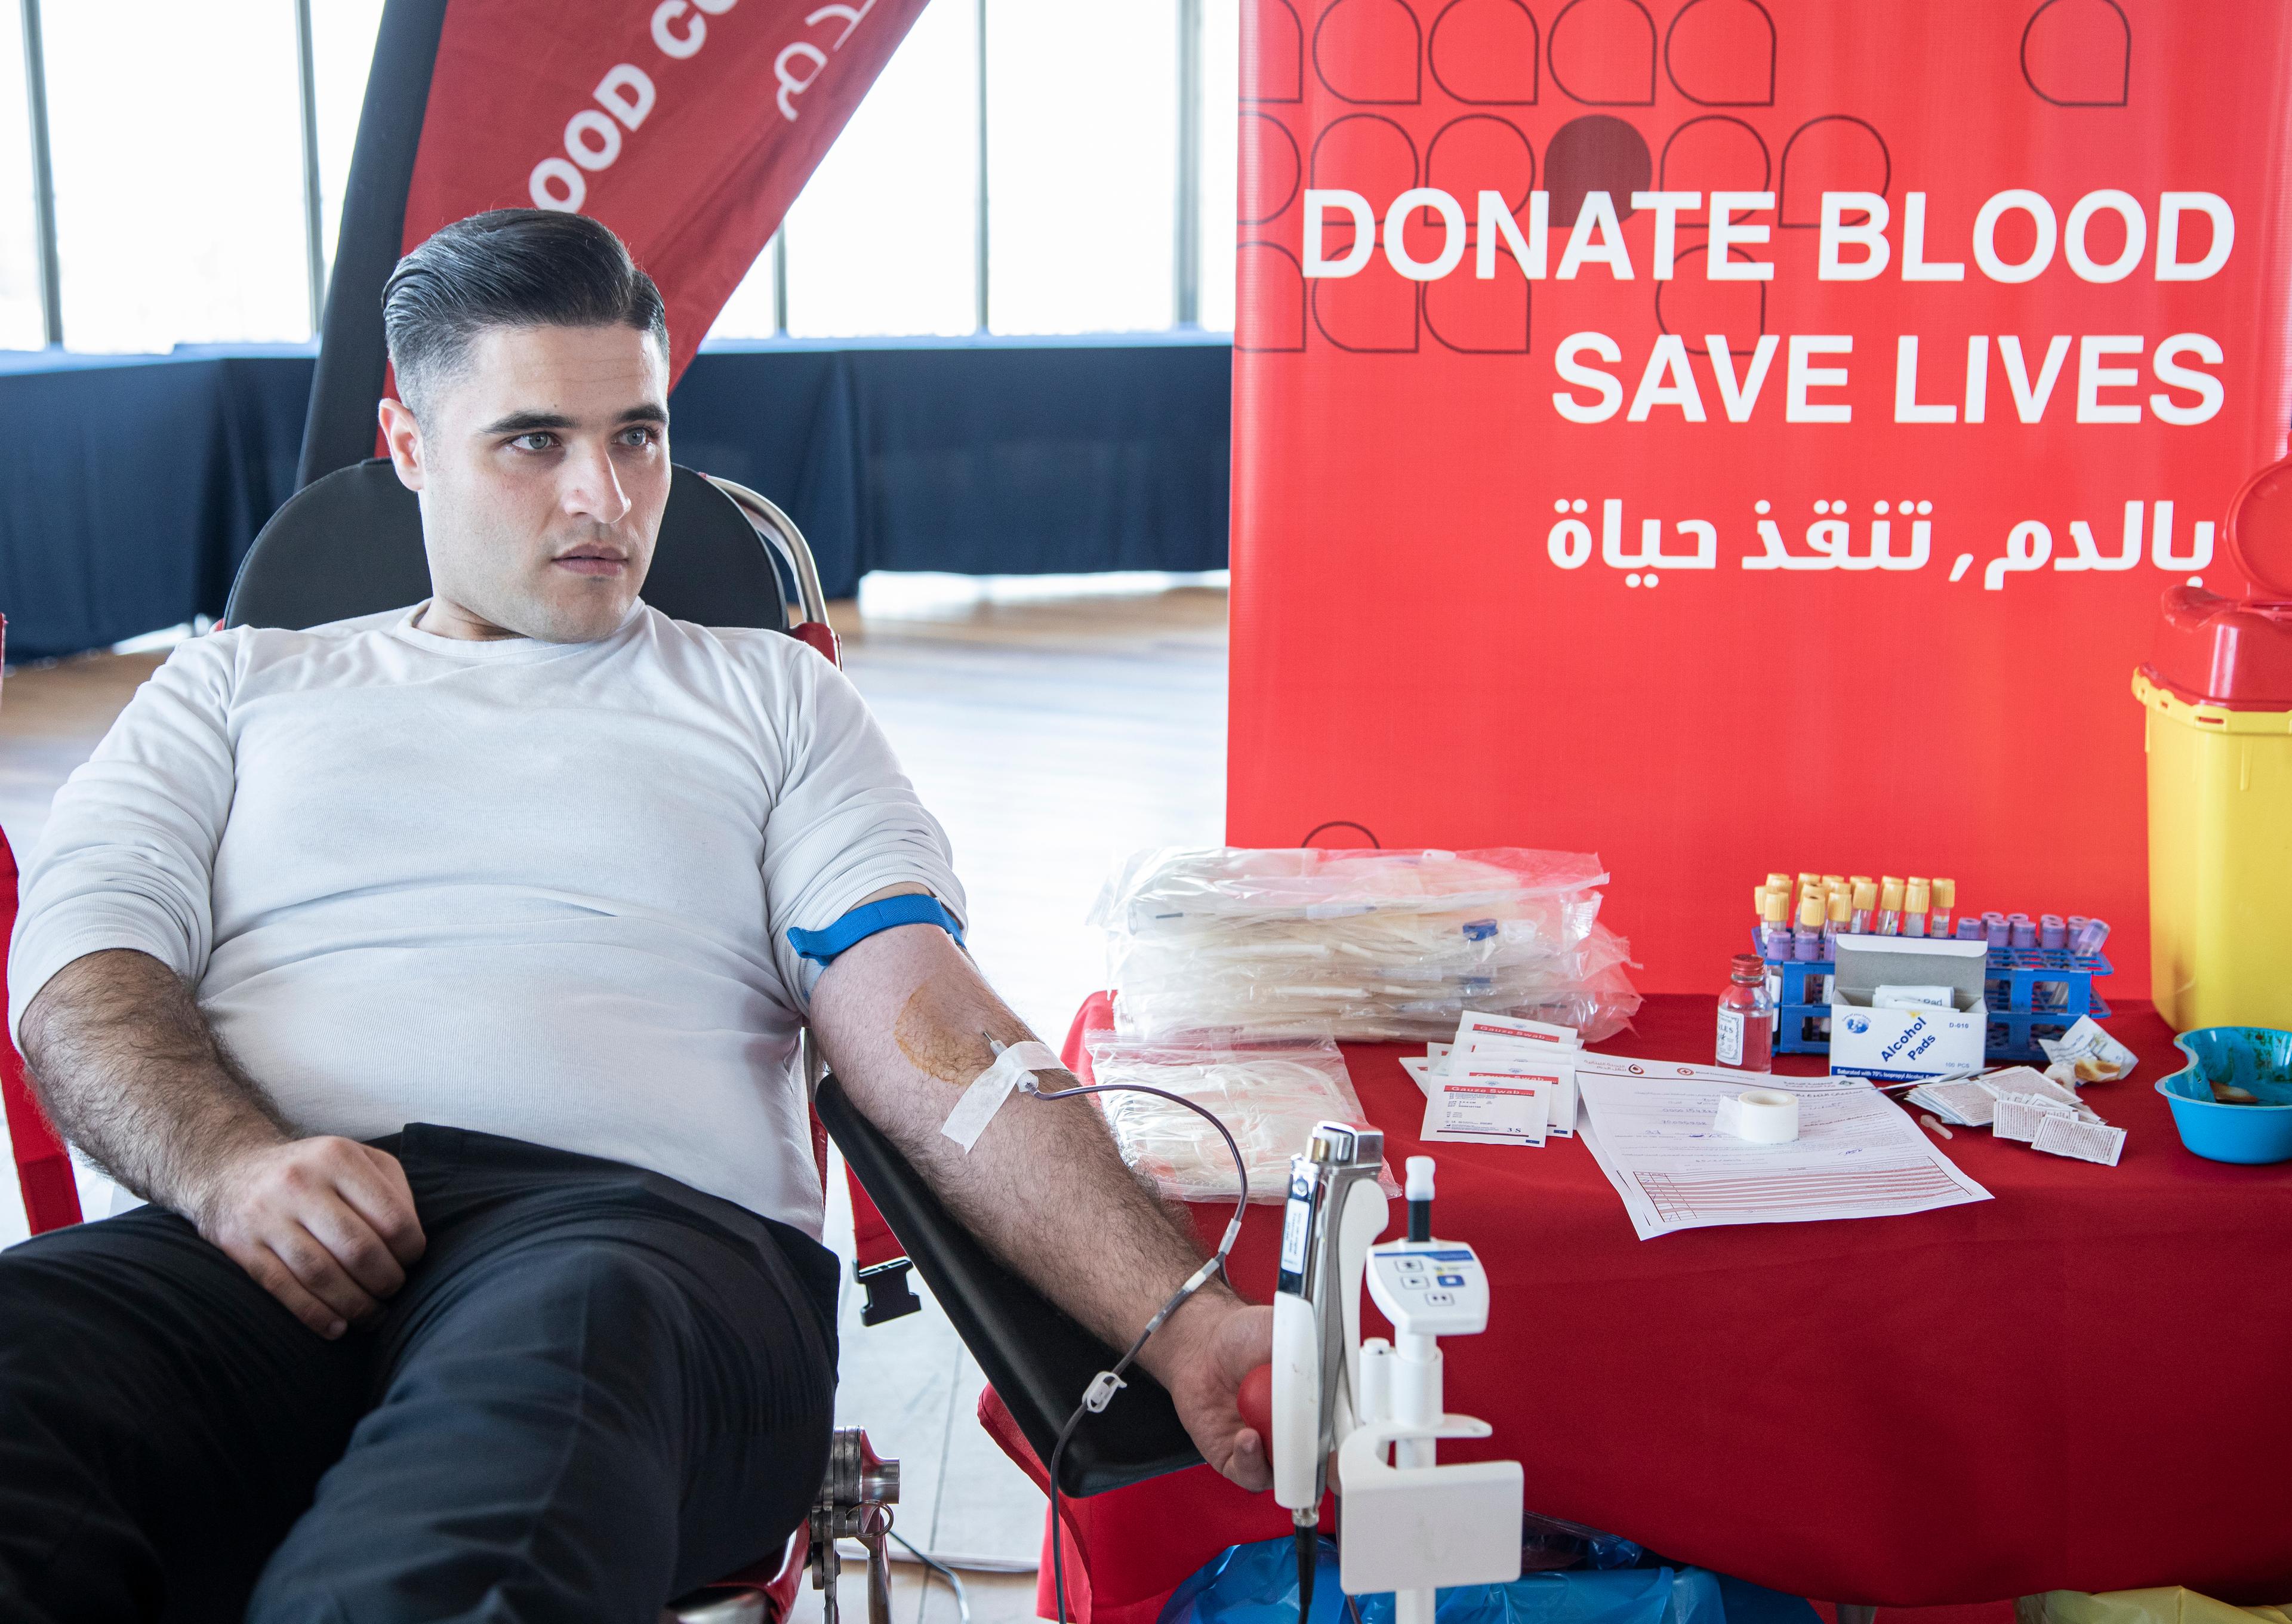 A man donating blood at the Lebanese Red Cross. He is sitting on a chair and has a small tube on his arm.